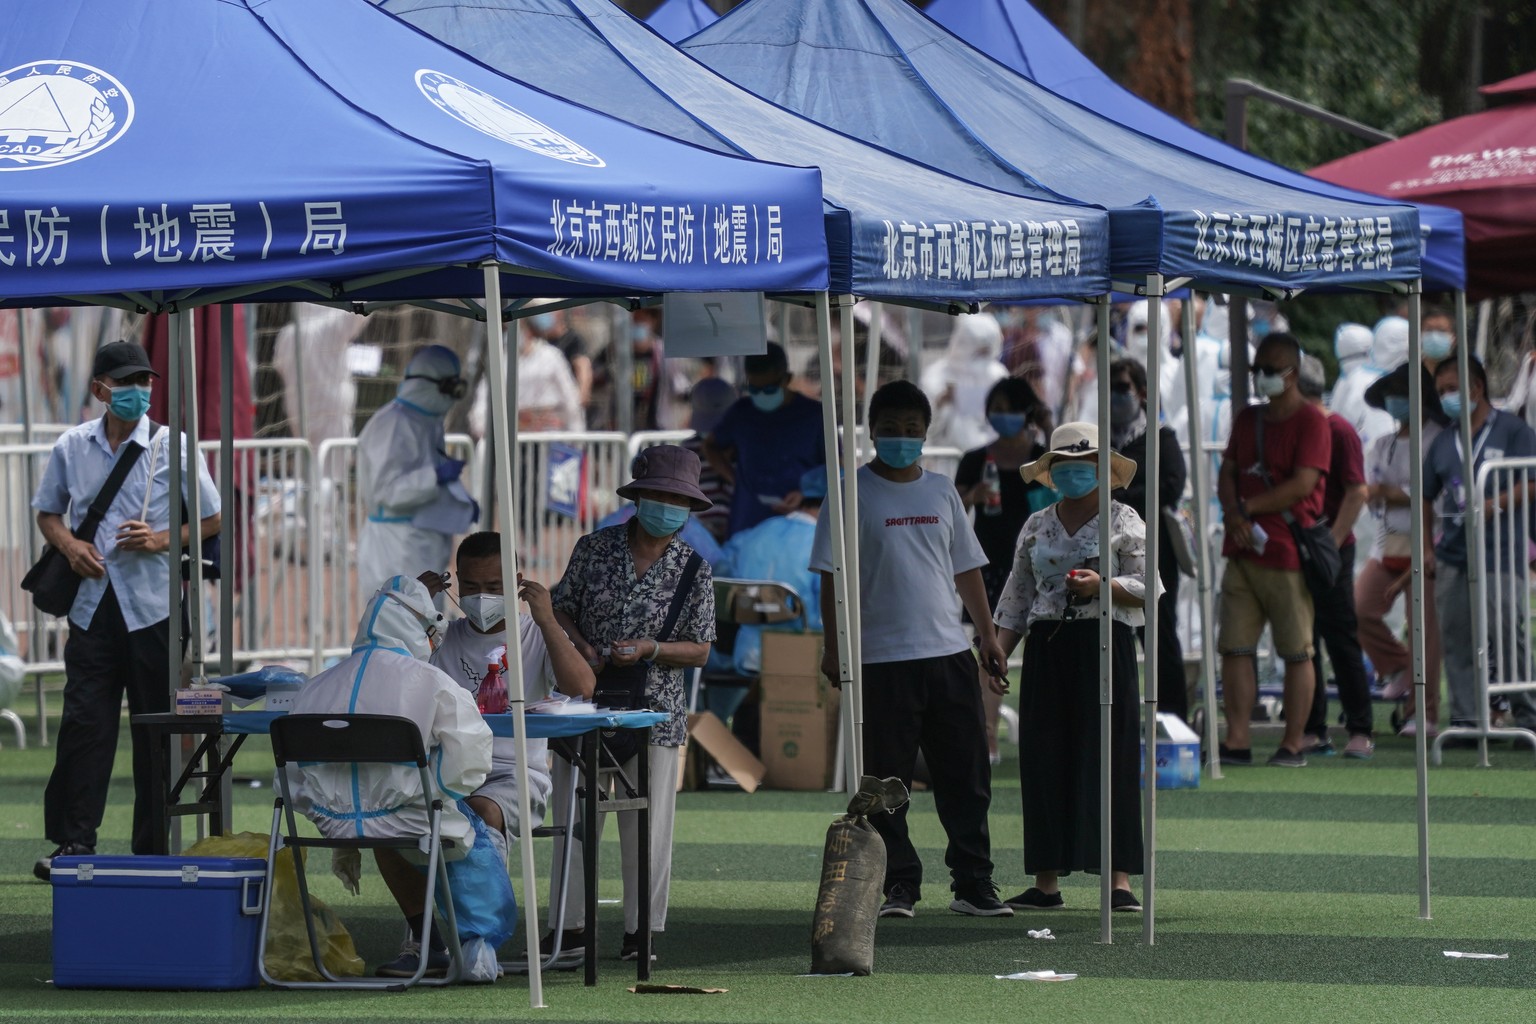 epa08485946 Local residents, who visited or live near Xinfadi Market, queue for a COVID-19 test at Guang&#039;an Sport Center in Beijing, China, 15 June 2020. Beijing conducted COVID-19 tests on more  ...